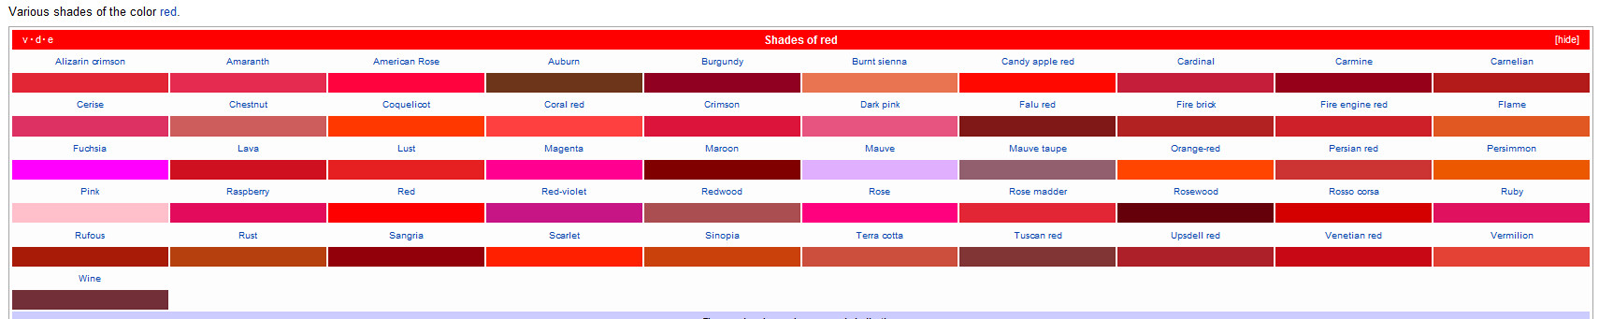 Shades of Red.png